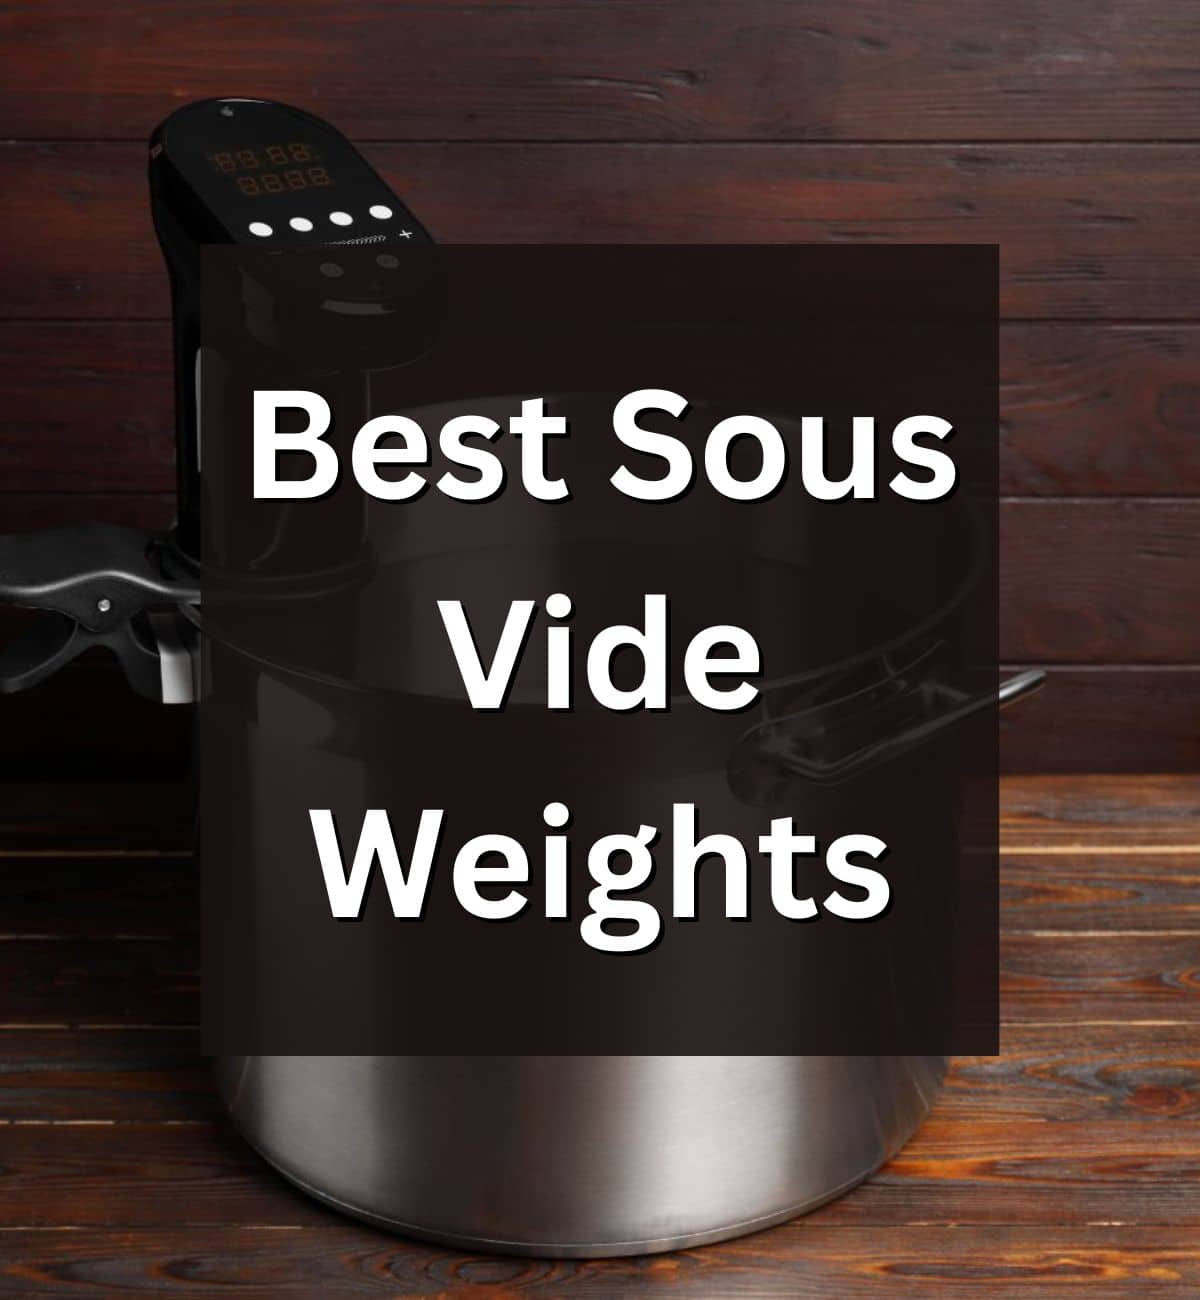 Best Sous Vide Weights - Went Here 8 This